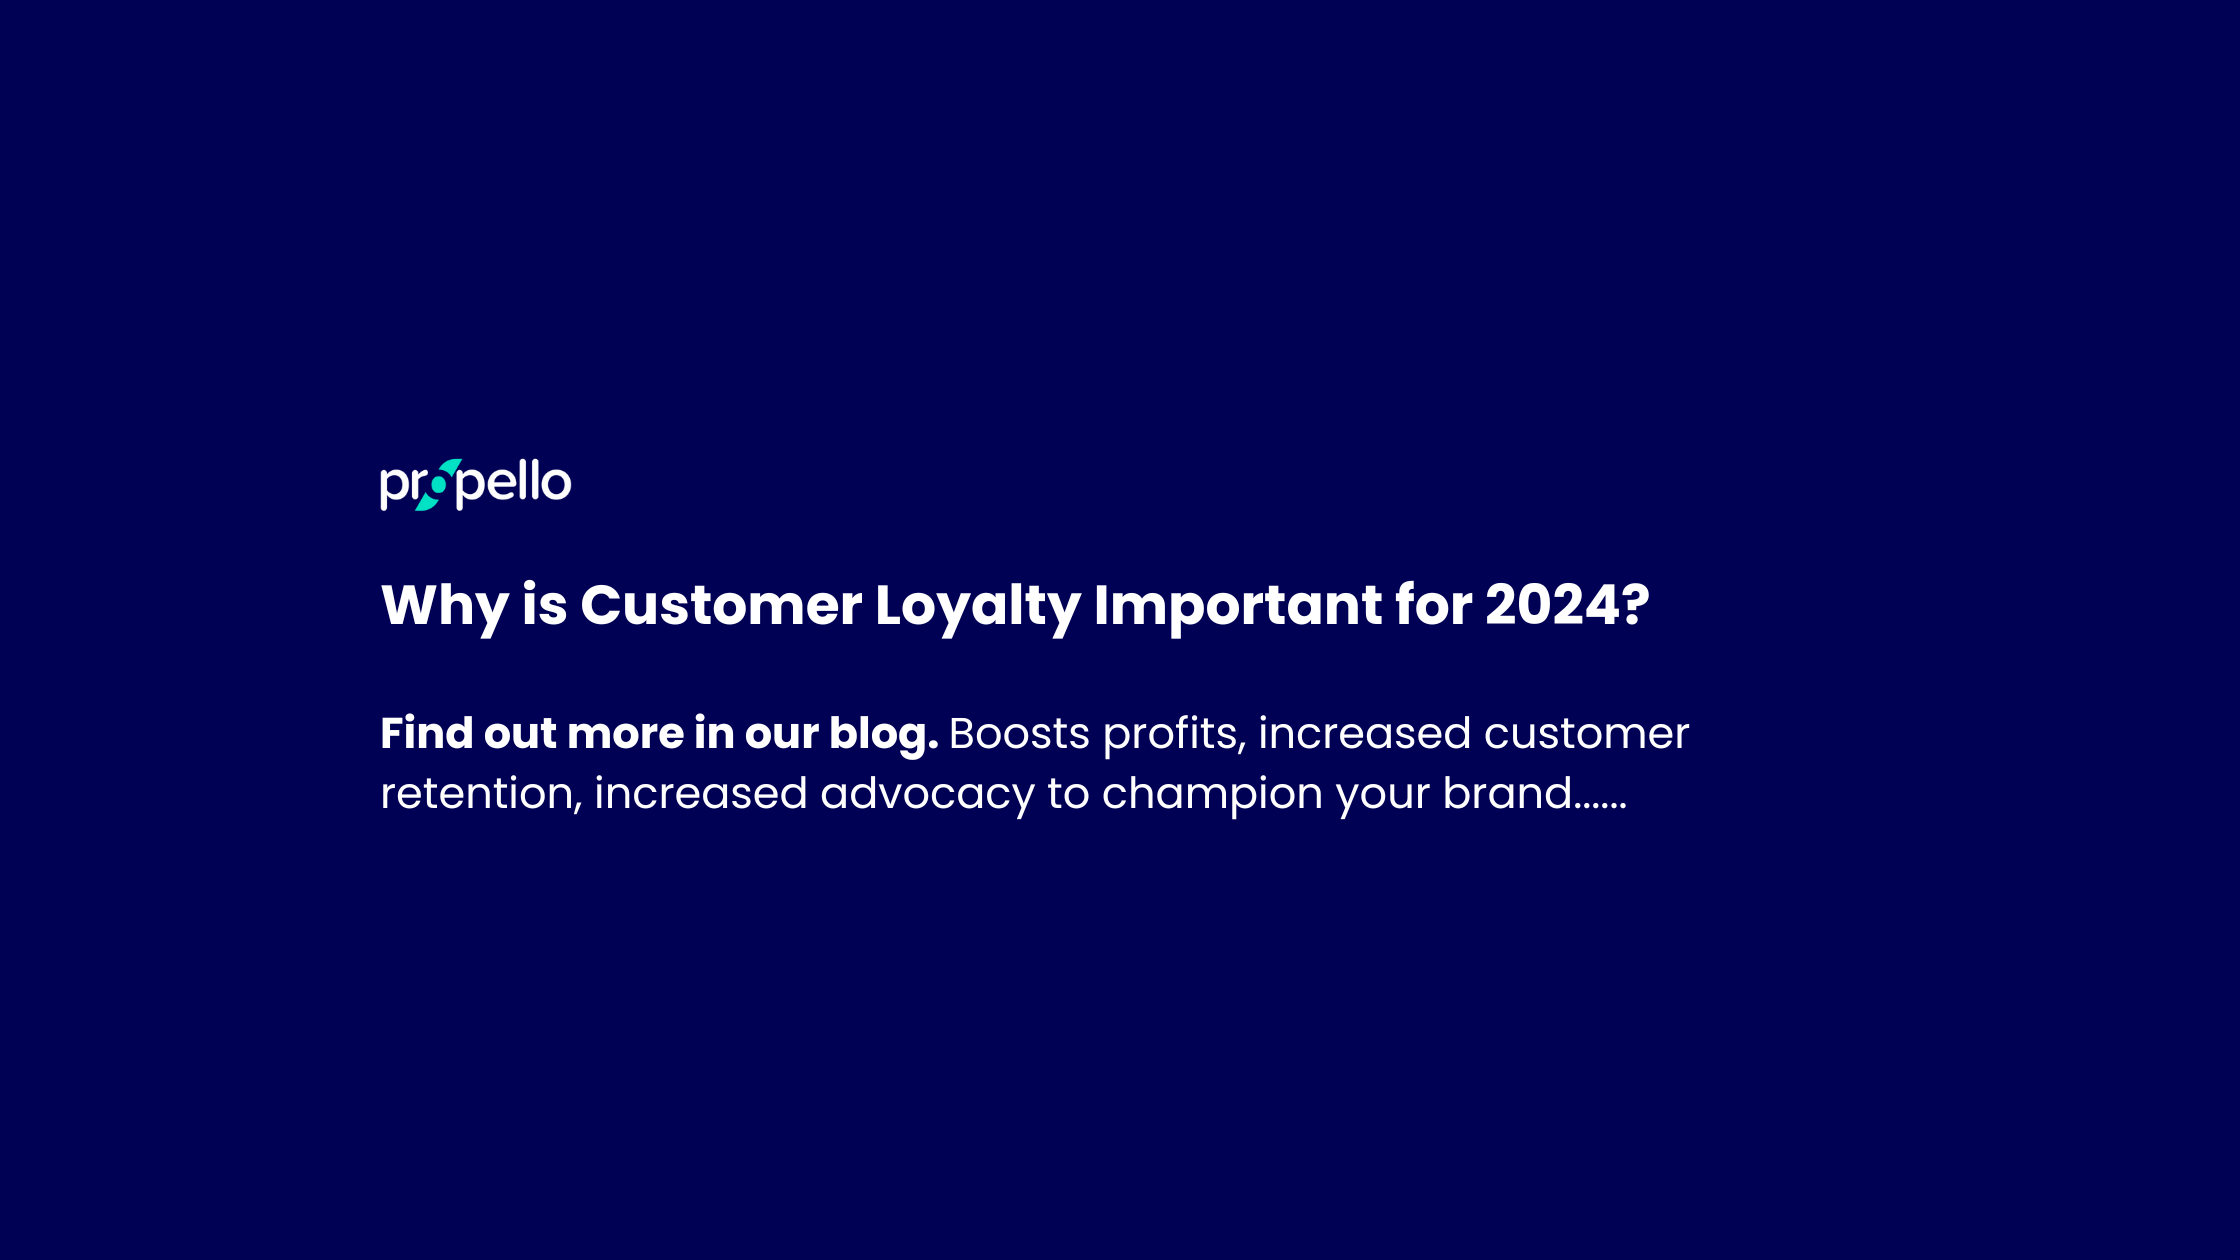 Why is Customer Loyalty Important?